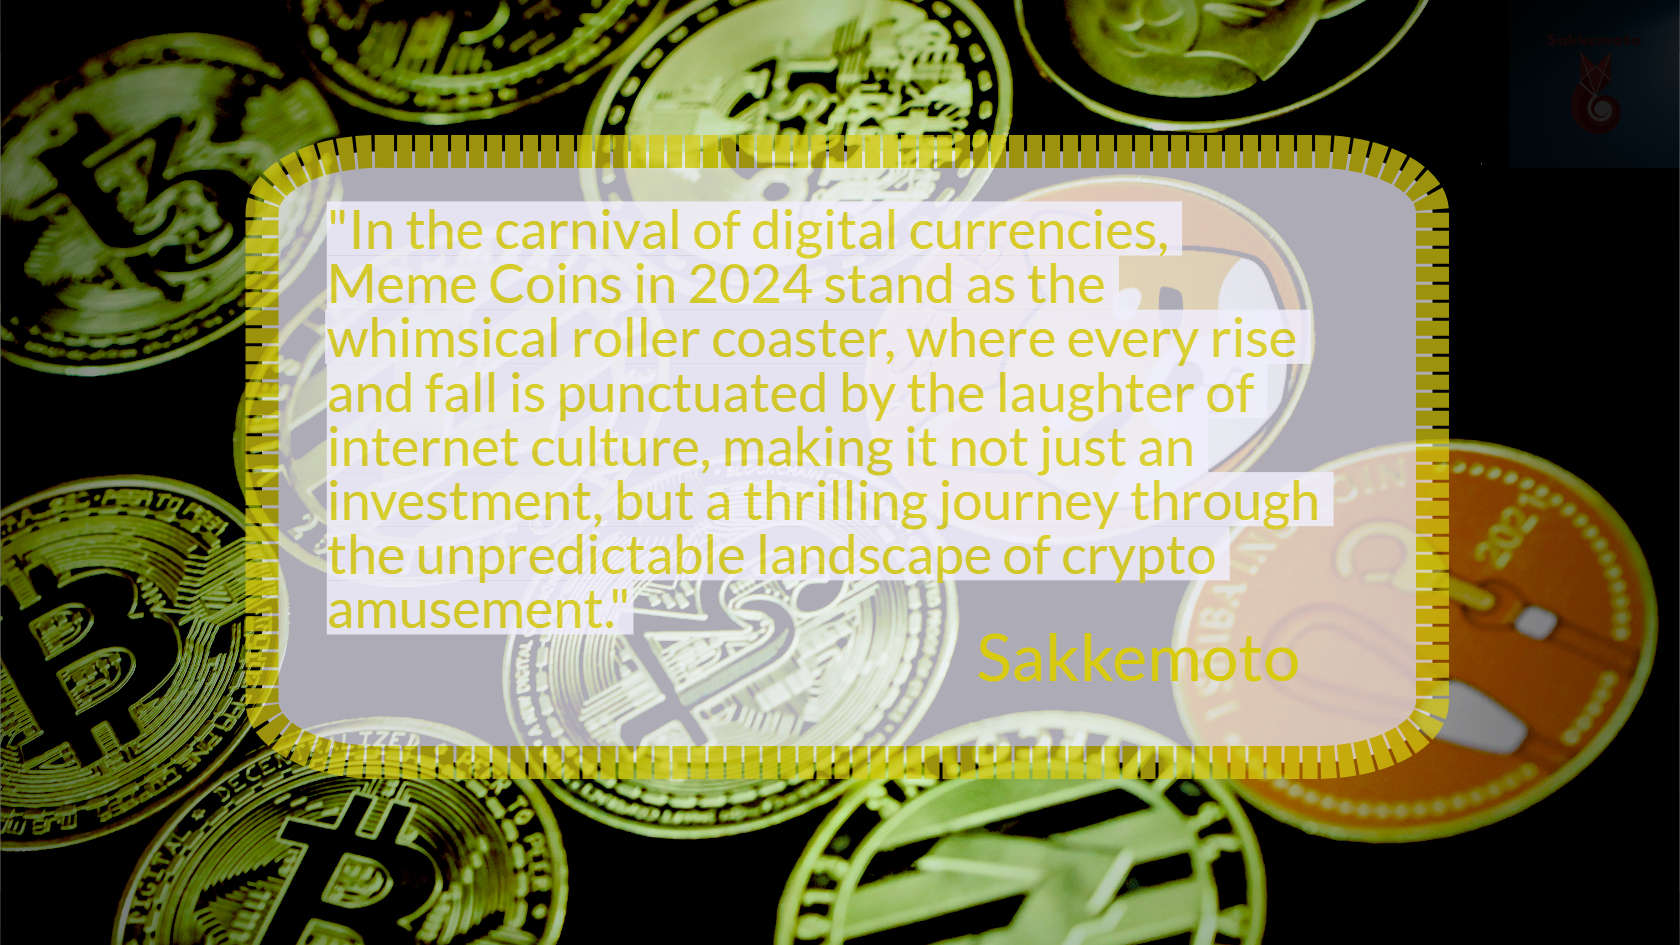 In the carnival of digital currencies, Meme Coins in 2024 stand as the whimsical roller coaster, 